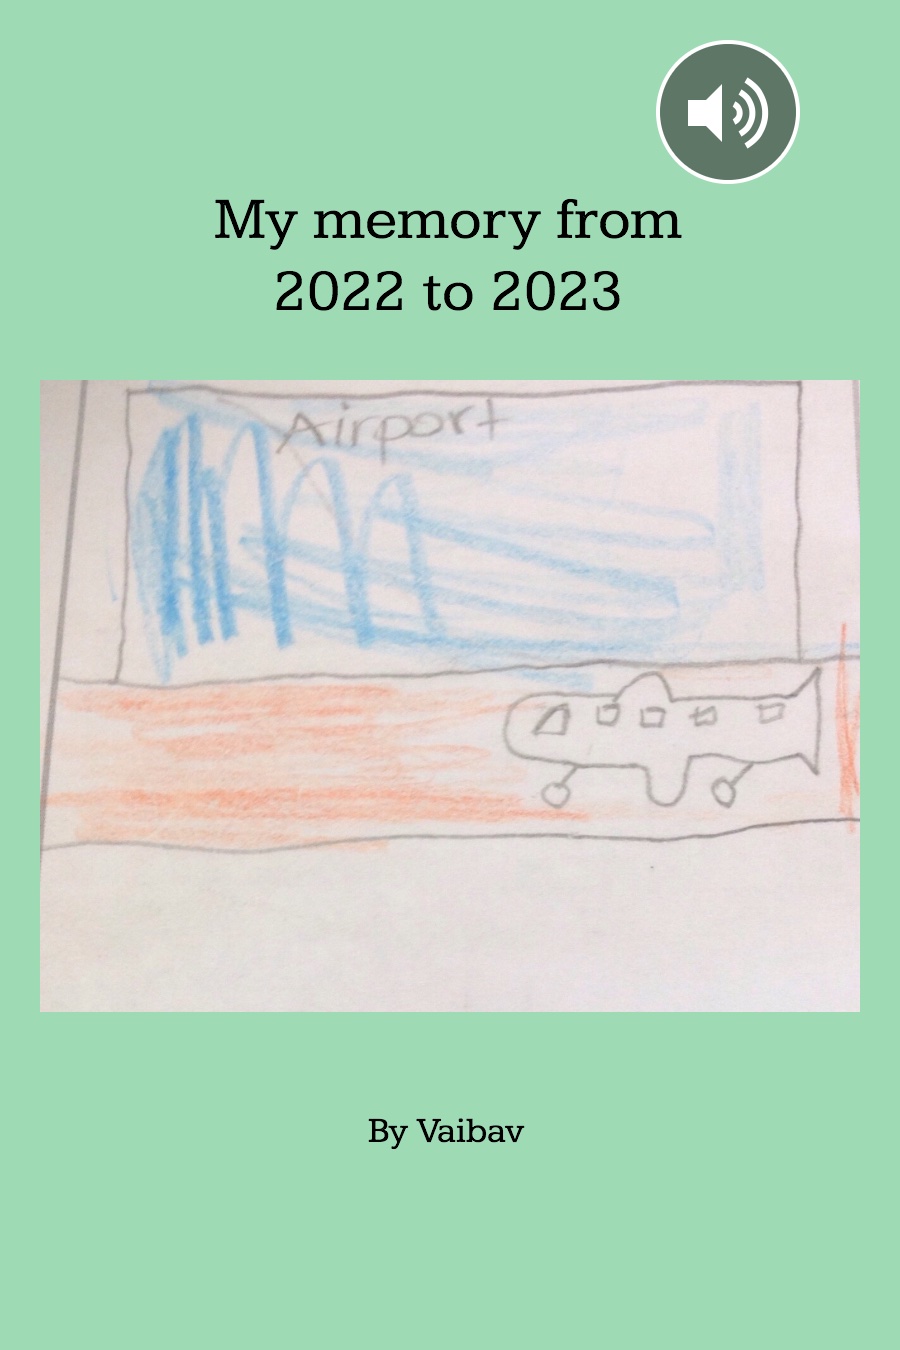 My memory from 2022-2023 by Vaibhav A